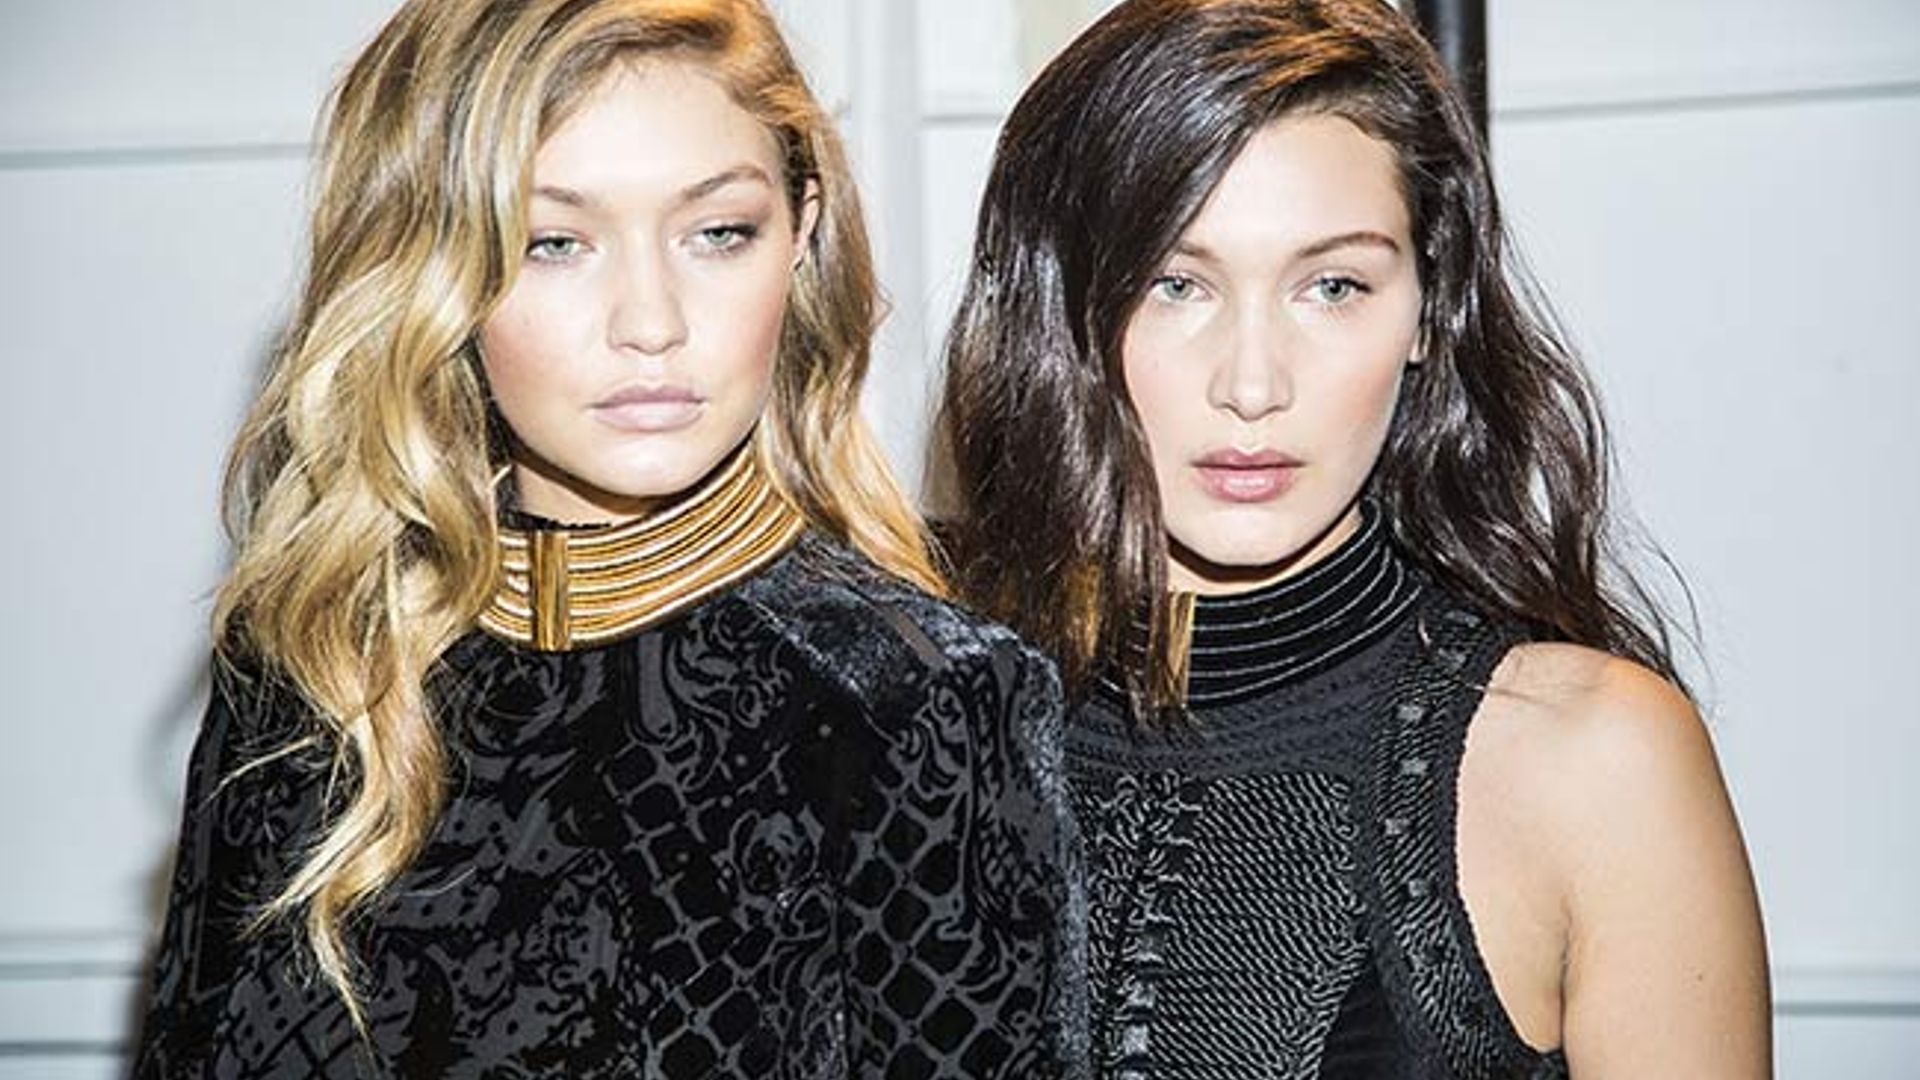 The Top 4 Essential Travel Bags, As Worn by Gigi and Bella Hadid